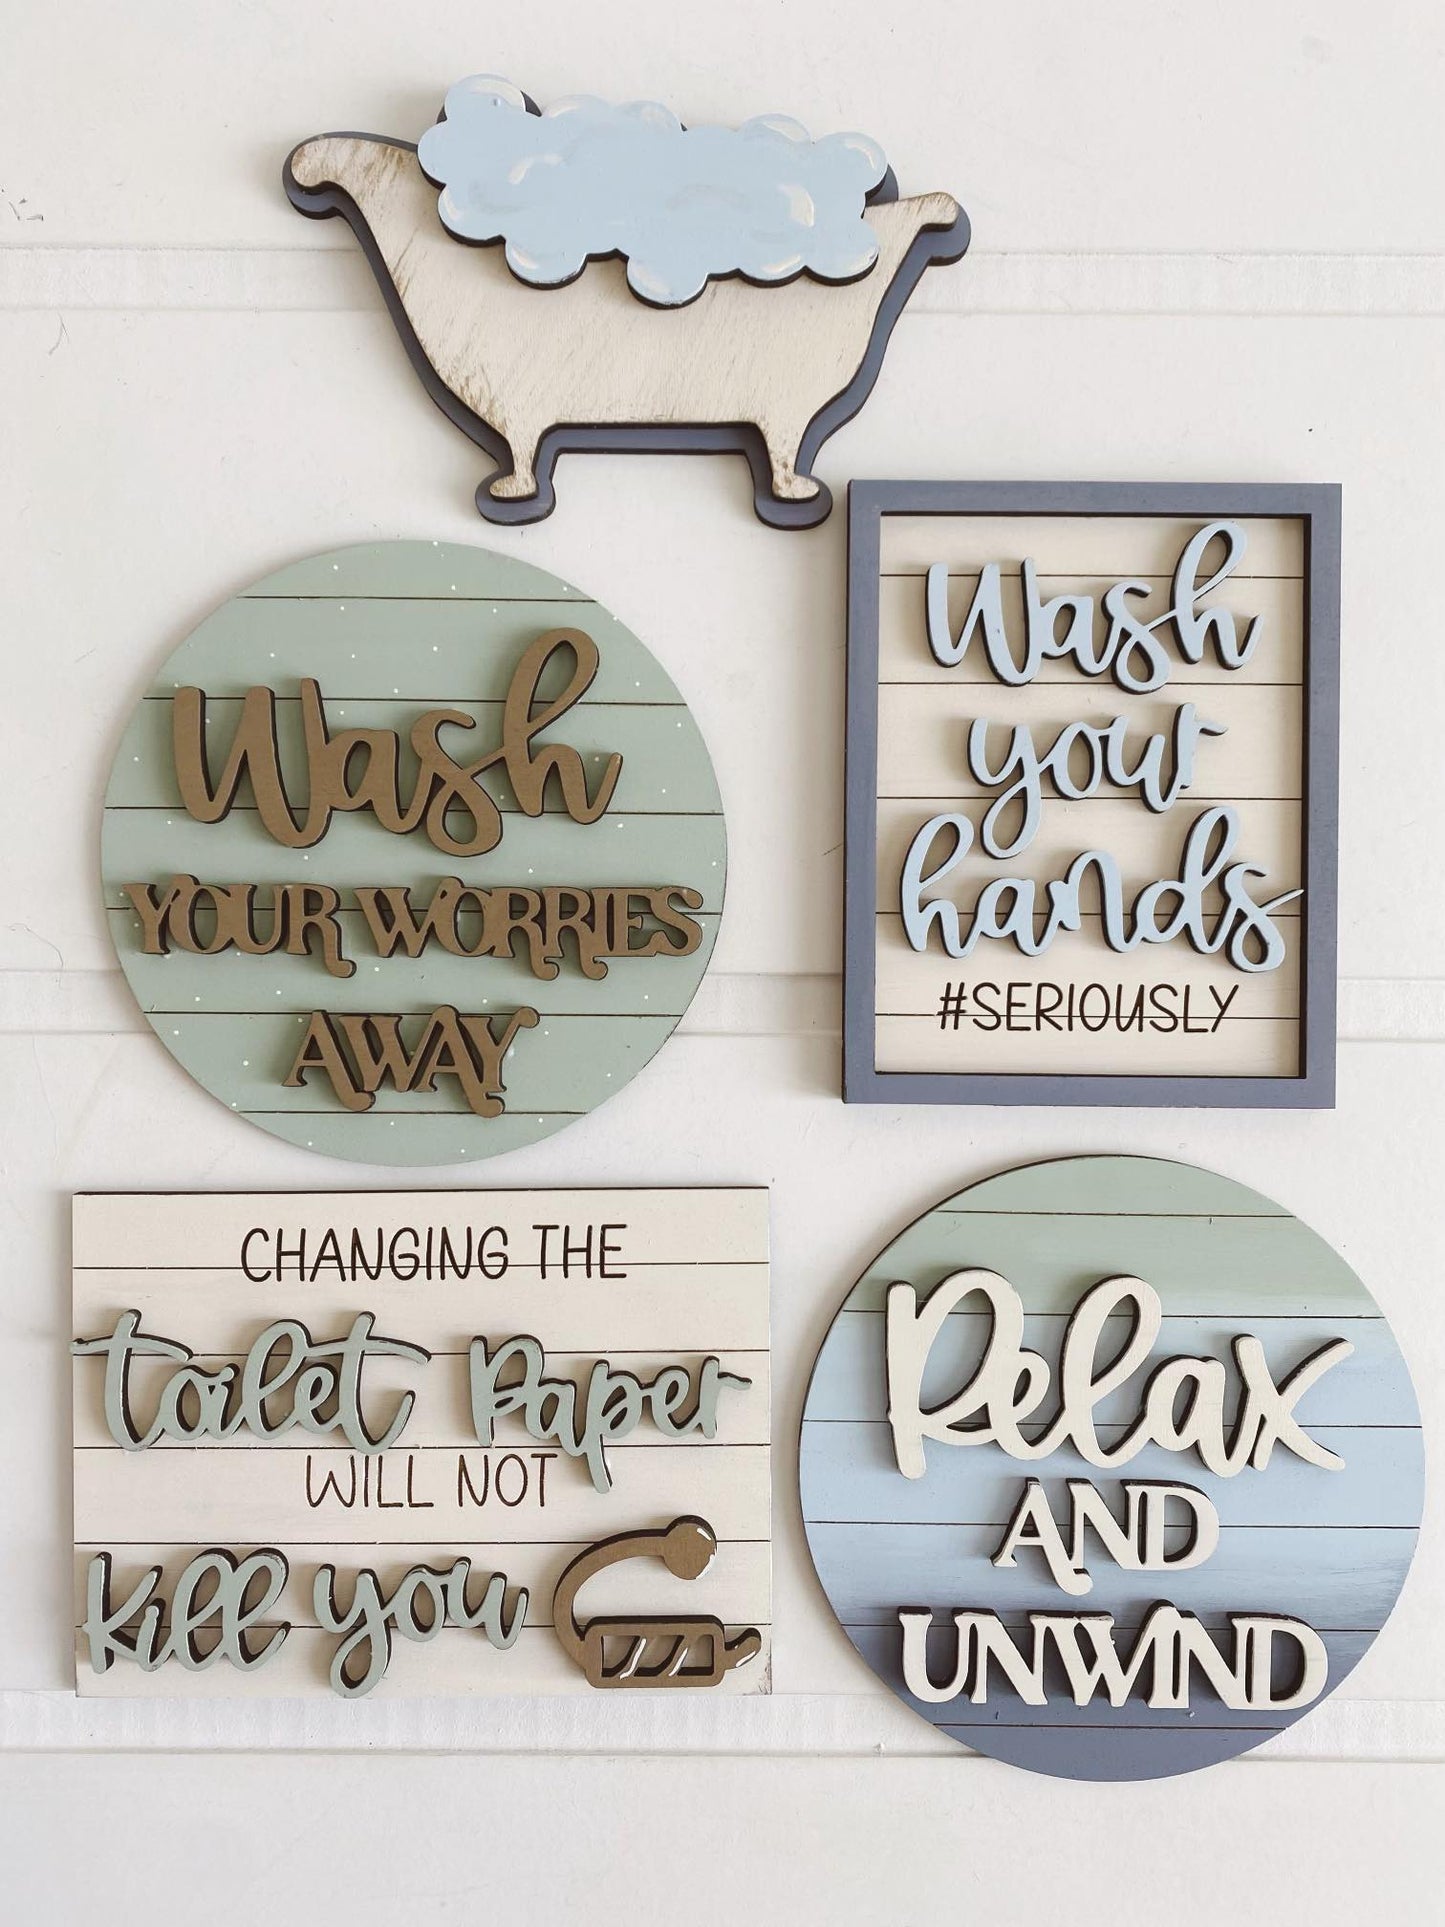 3D Tiered Tray Decor - Relax and Unwind